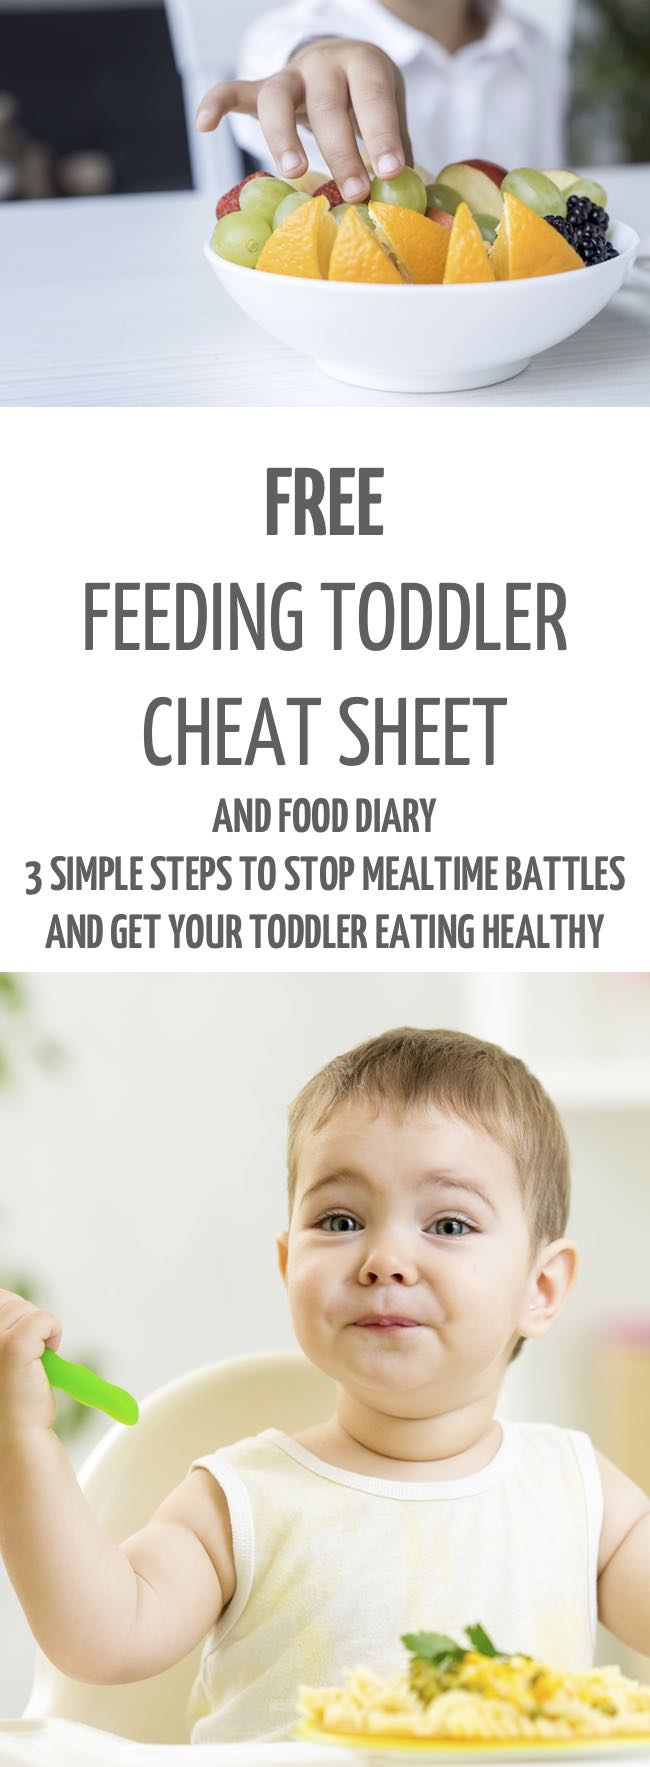 3 Simple steps to teach your fussy toddler to eat healthy. Even if your toddler won't eat anything, learn how to stop meal time battles and find the stress free way to teach them healthy eating habits. #toddler #fussyeater #fussytoddler #toddlerwon'teat #pickyeater #parenting #positiveparenting.. #toddler #fussyeater #fussytoddler #toddlerwon'teat #pickyeater #parenting #positiveparenting.